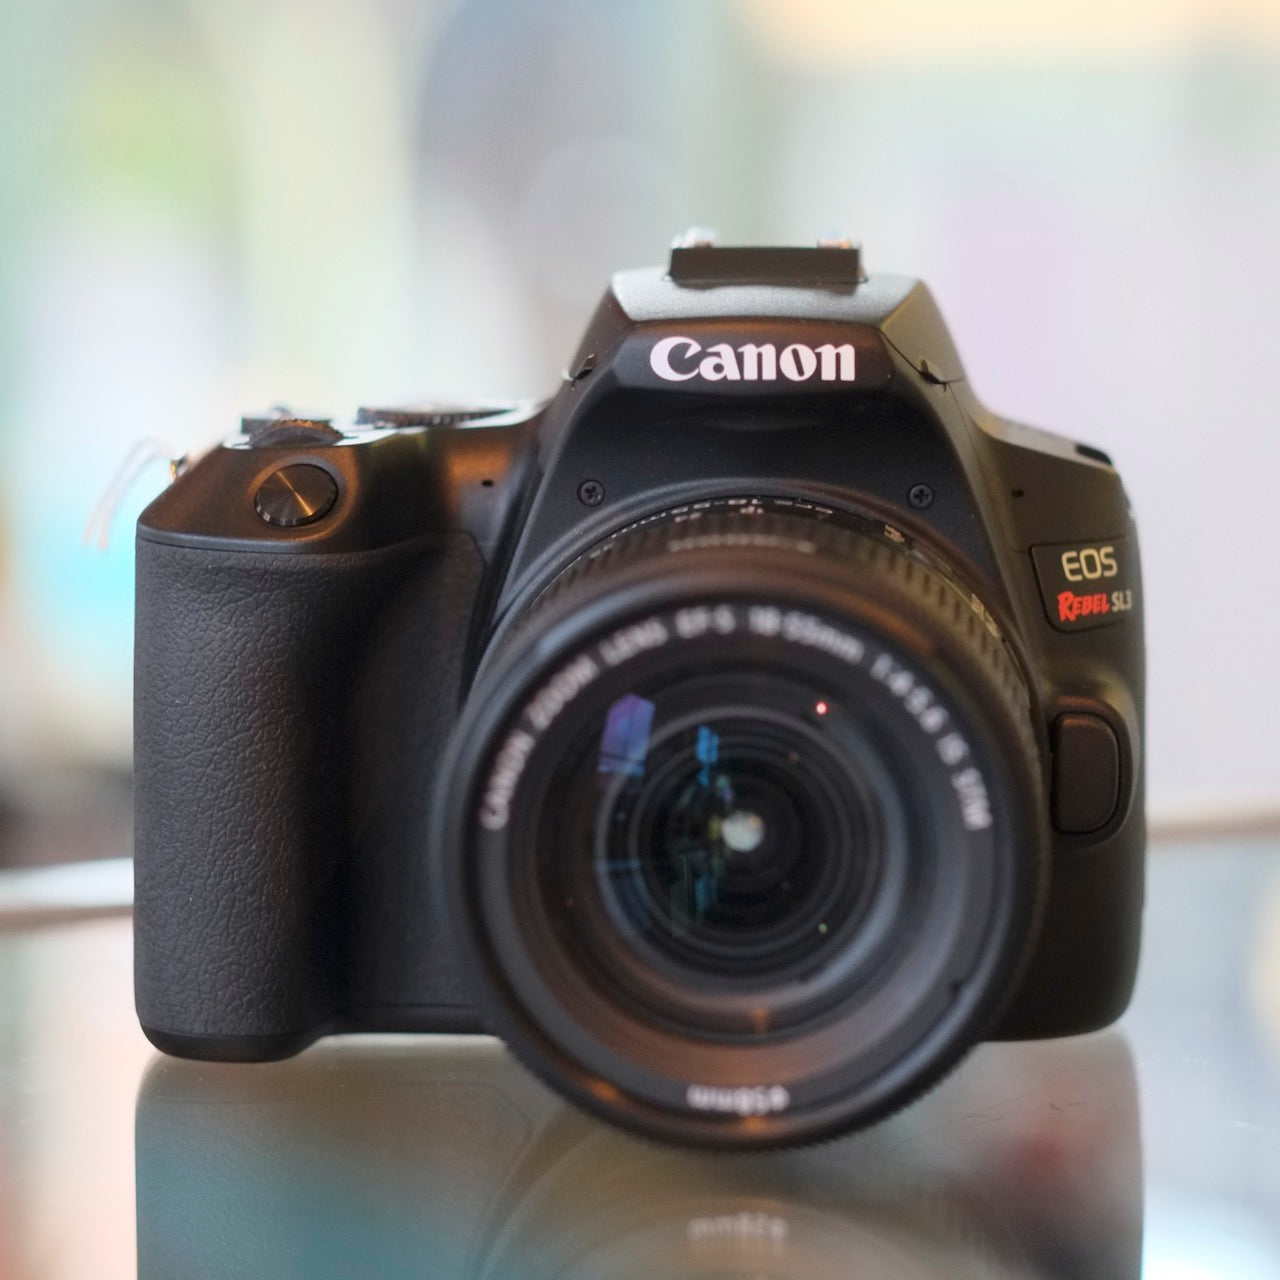 Canon EOS Rebel SL3 with 18-55mm f3.5-5.6 IS STM